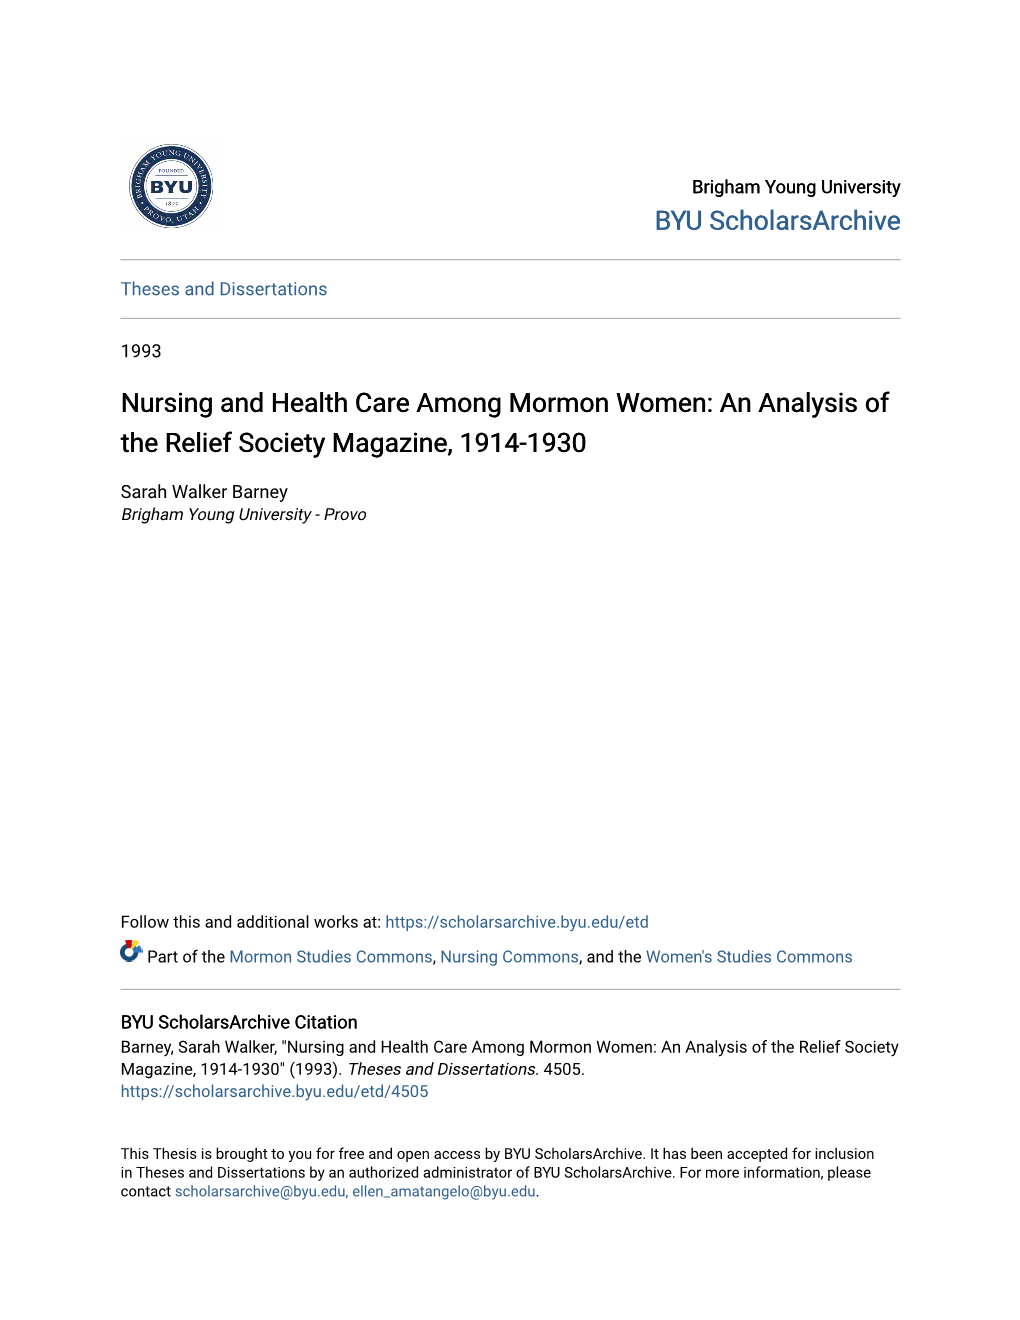 Nursing and Health Care Among Mormon Women: an Analysis of the Relief Society Magazine, 1914-1930